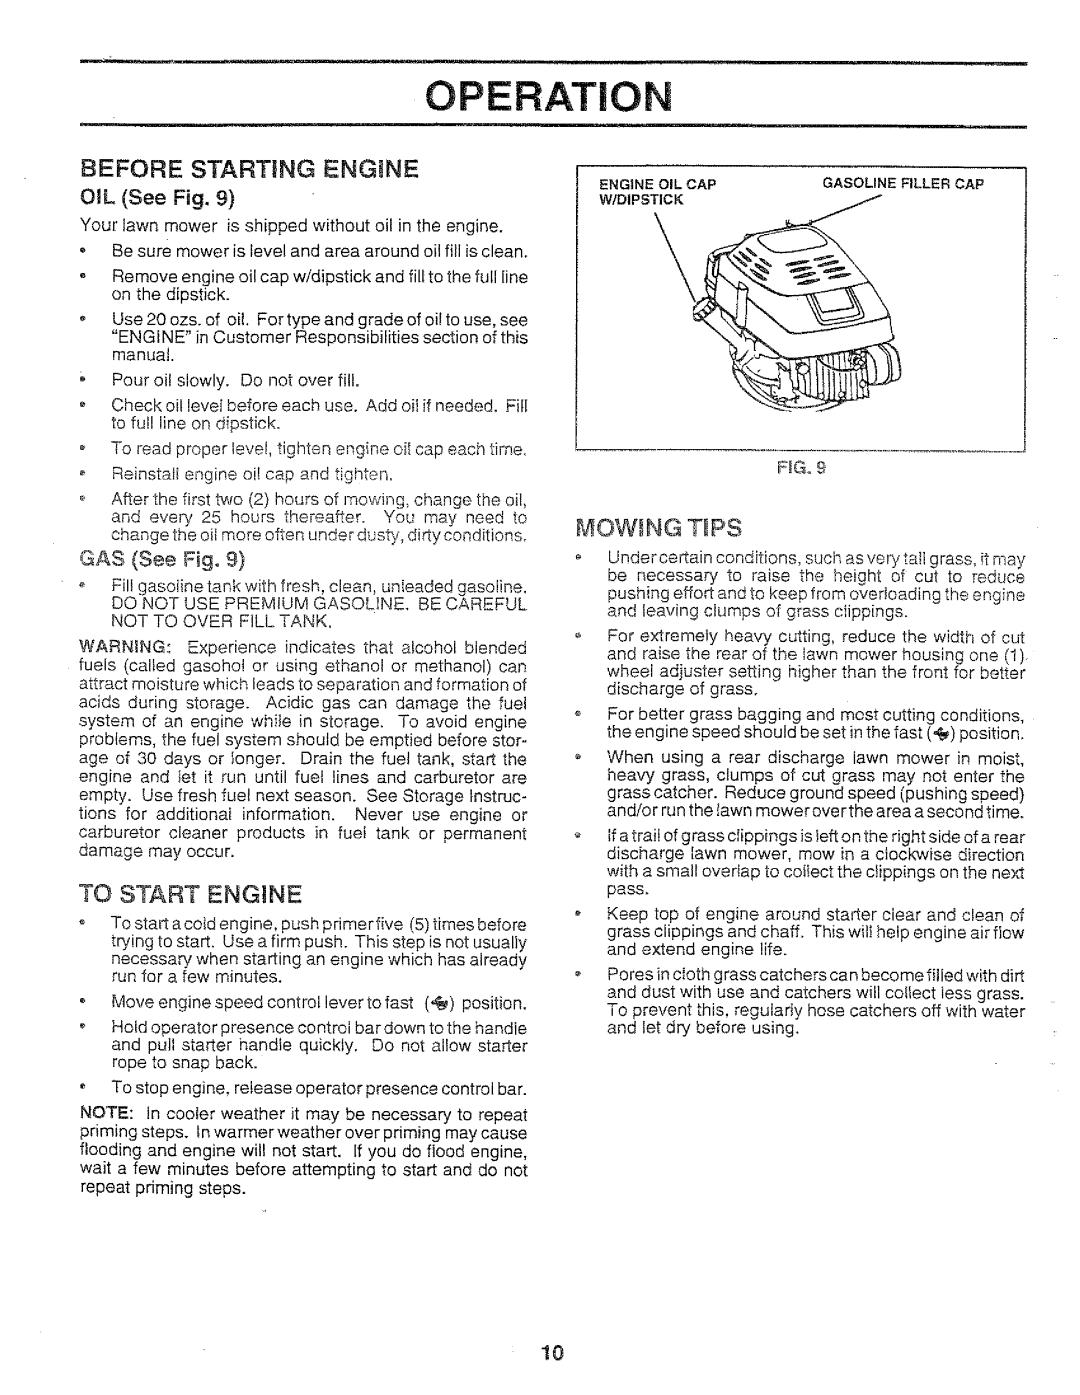 Sears 917.37283 manual Operation, Before Starting Engine, To Start Engine, Mowing Tips, GAS See Fig 